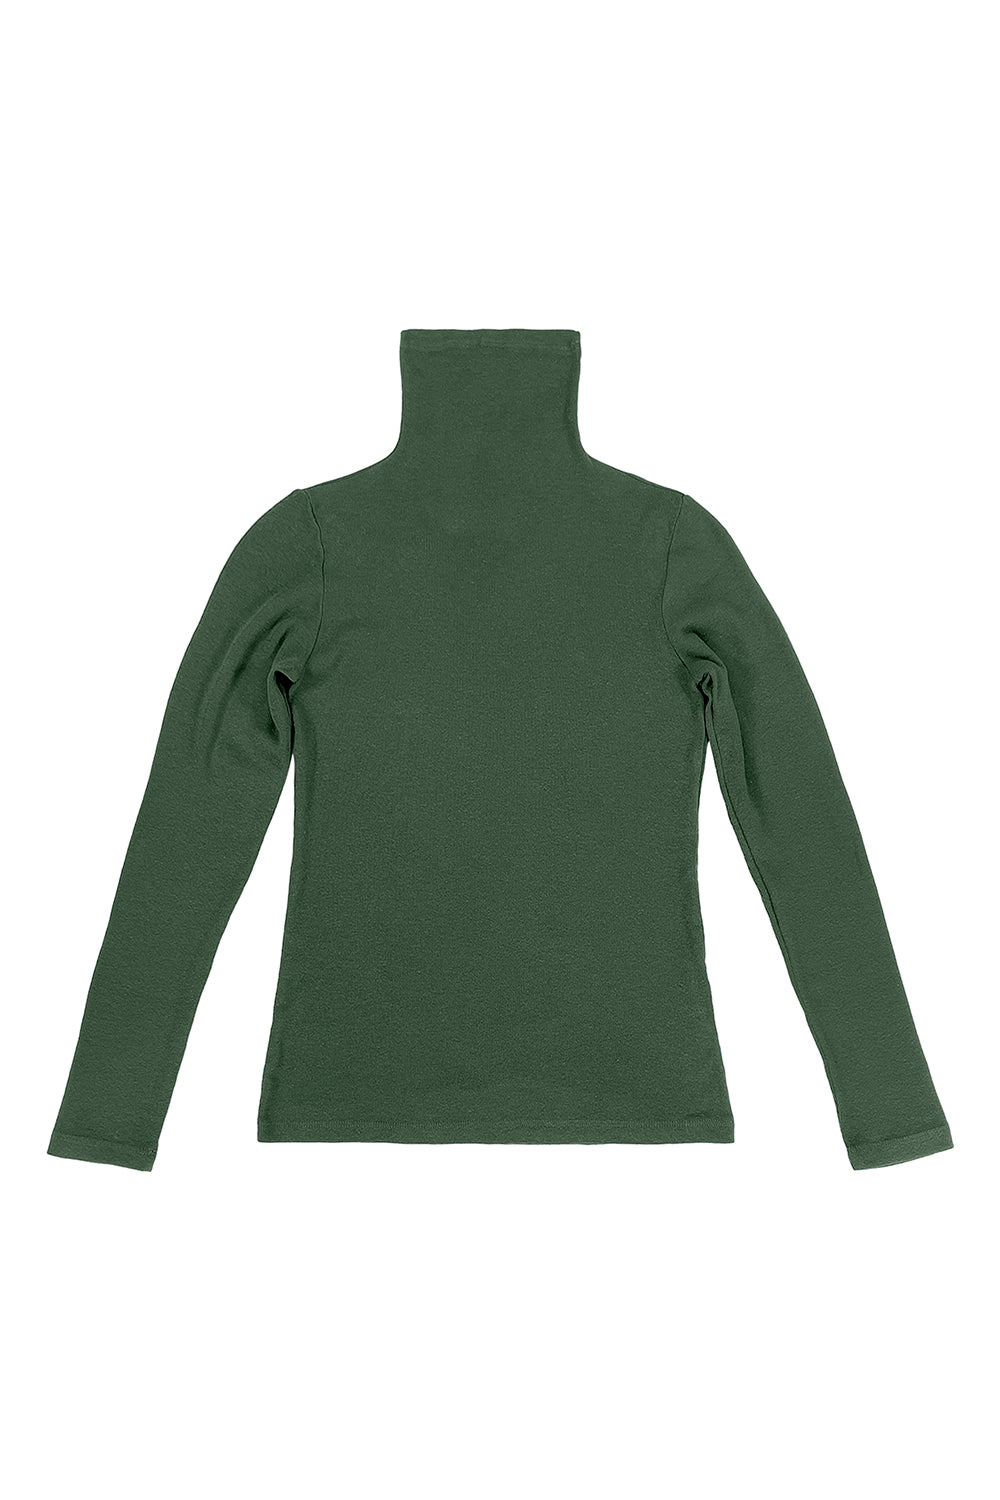 Whidbey Turtleneck | Jungmaven Hemp Clothing & Accessories - USA Made